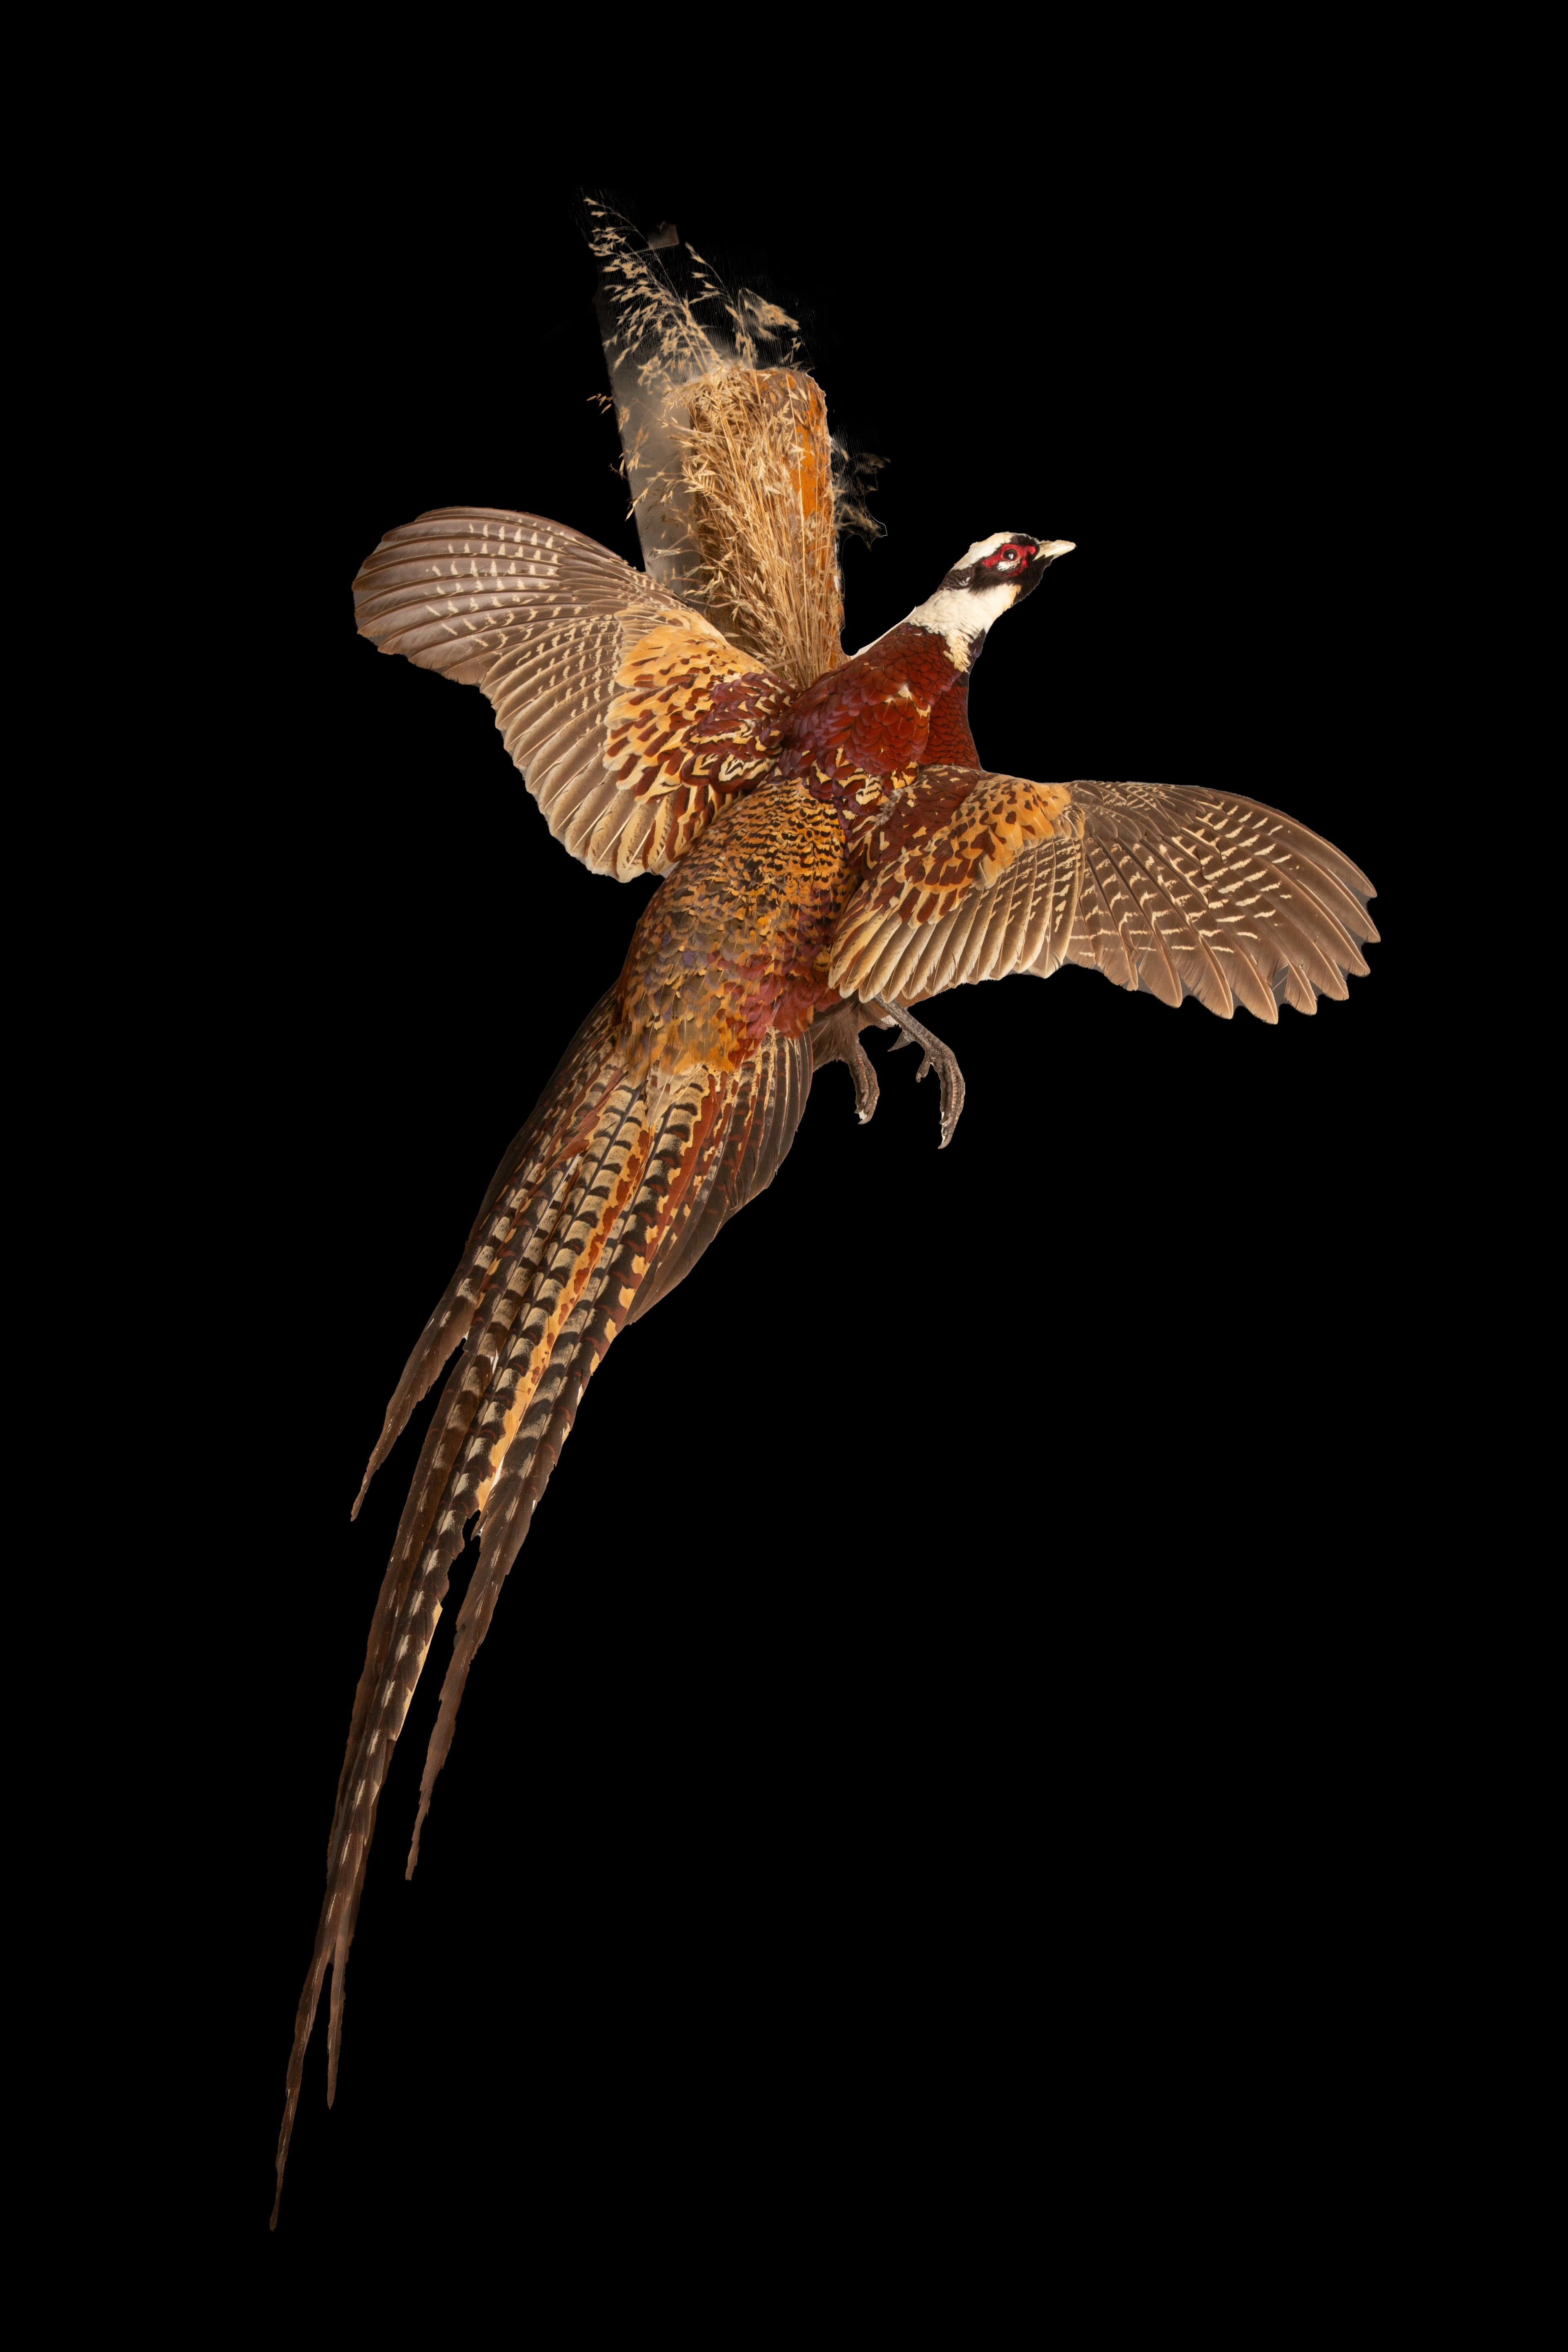 a majestic avian marvel hailing from the verdant forests of central and western China. Distinguished by its exquisite plumage, this enchanting bird captivates with a regal aura and captivating allure.

The male Reeves's Pheasant, or cock, boasts a